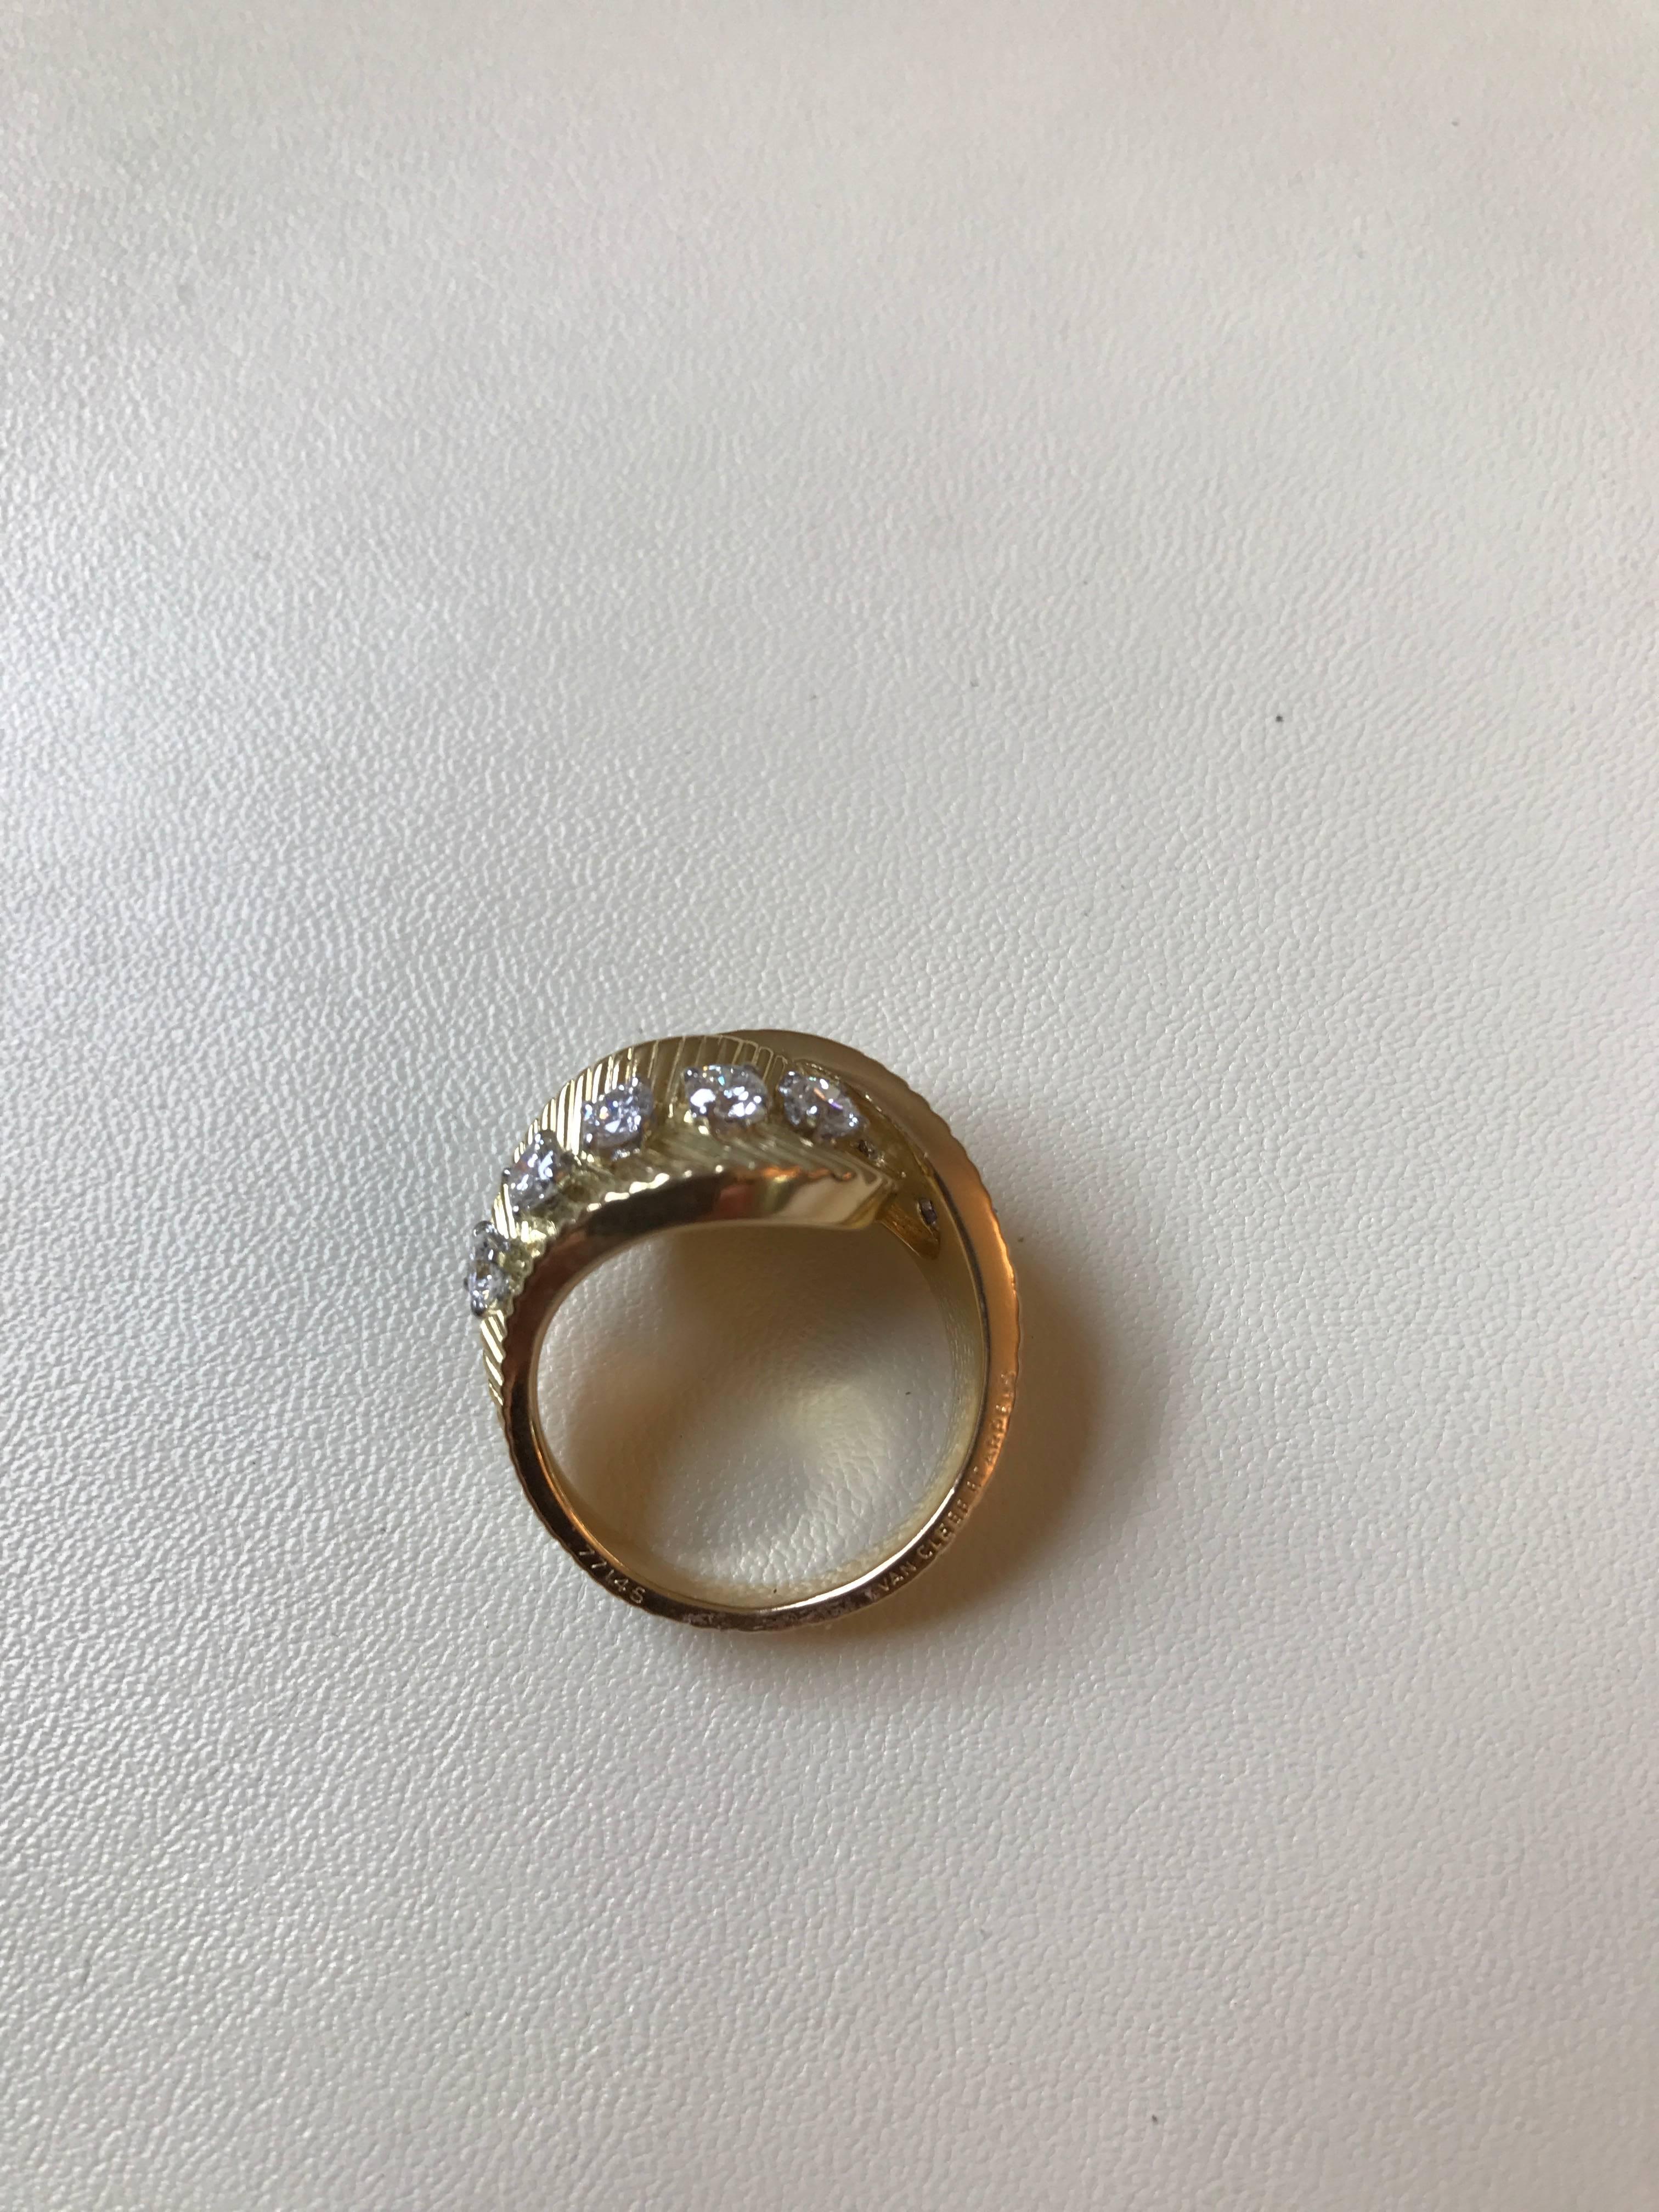 French 18 Carat Yellow Gold and Diamond Ring by Van Cleef & Arpels In Good Condition For Sale In London, GB